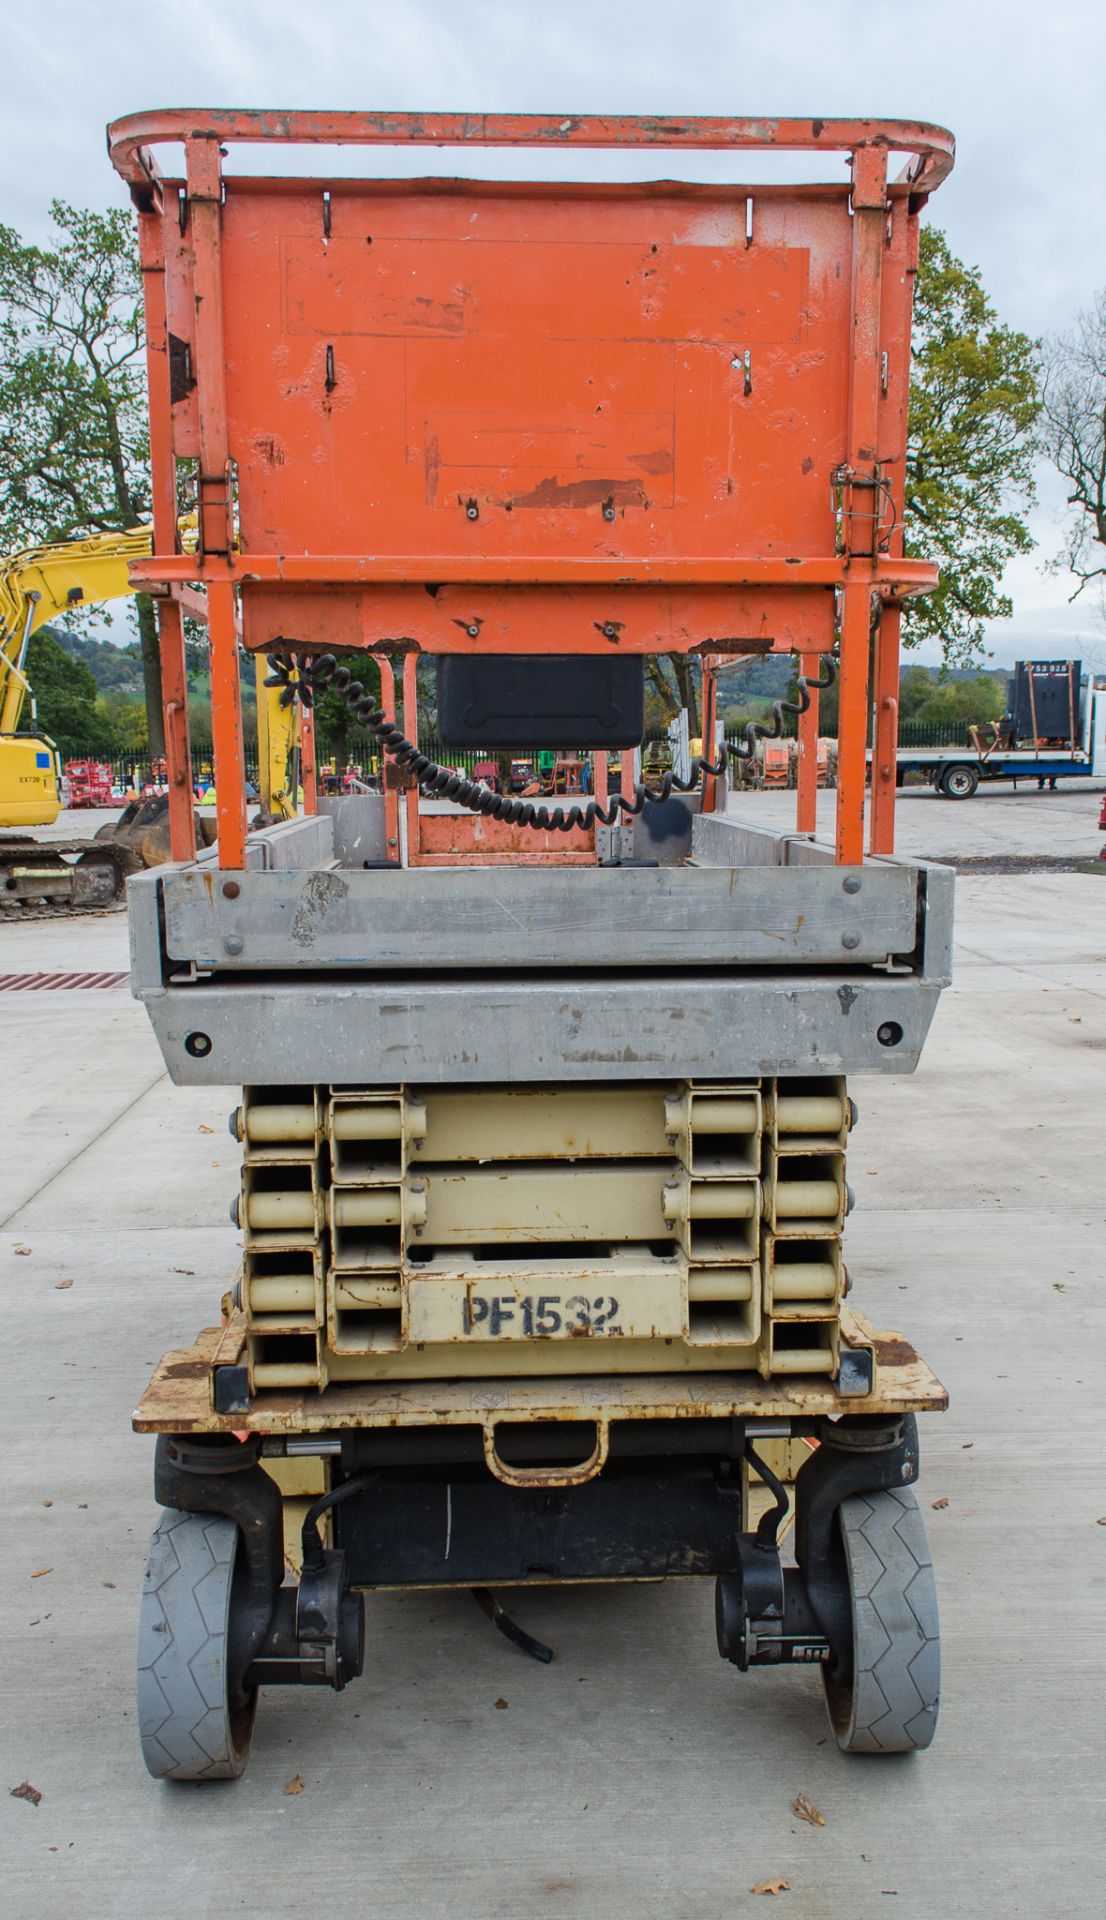 JLG 3246 ES battery electric scissor lift Year:- 2011 S/N: 2037 Recorded hours:- 416 PF1532 - Image 6 of 12